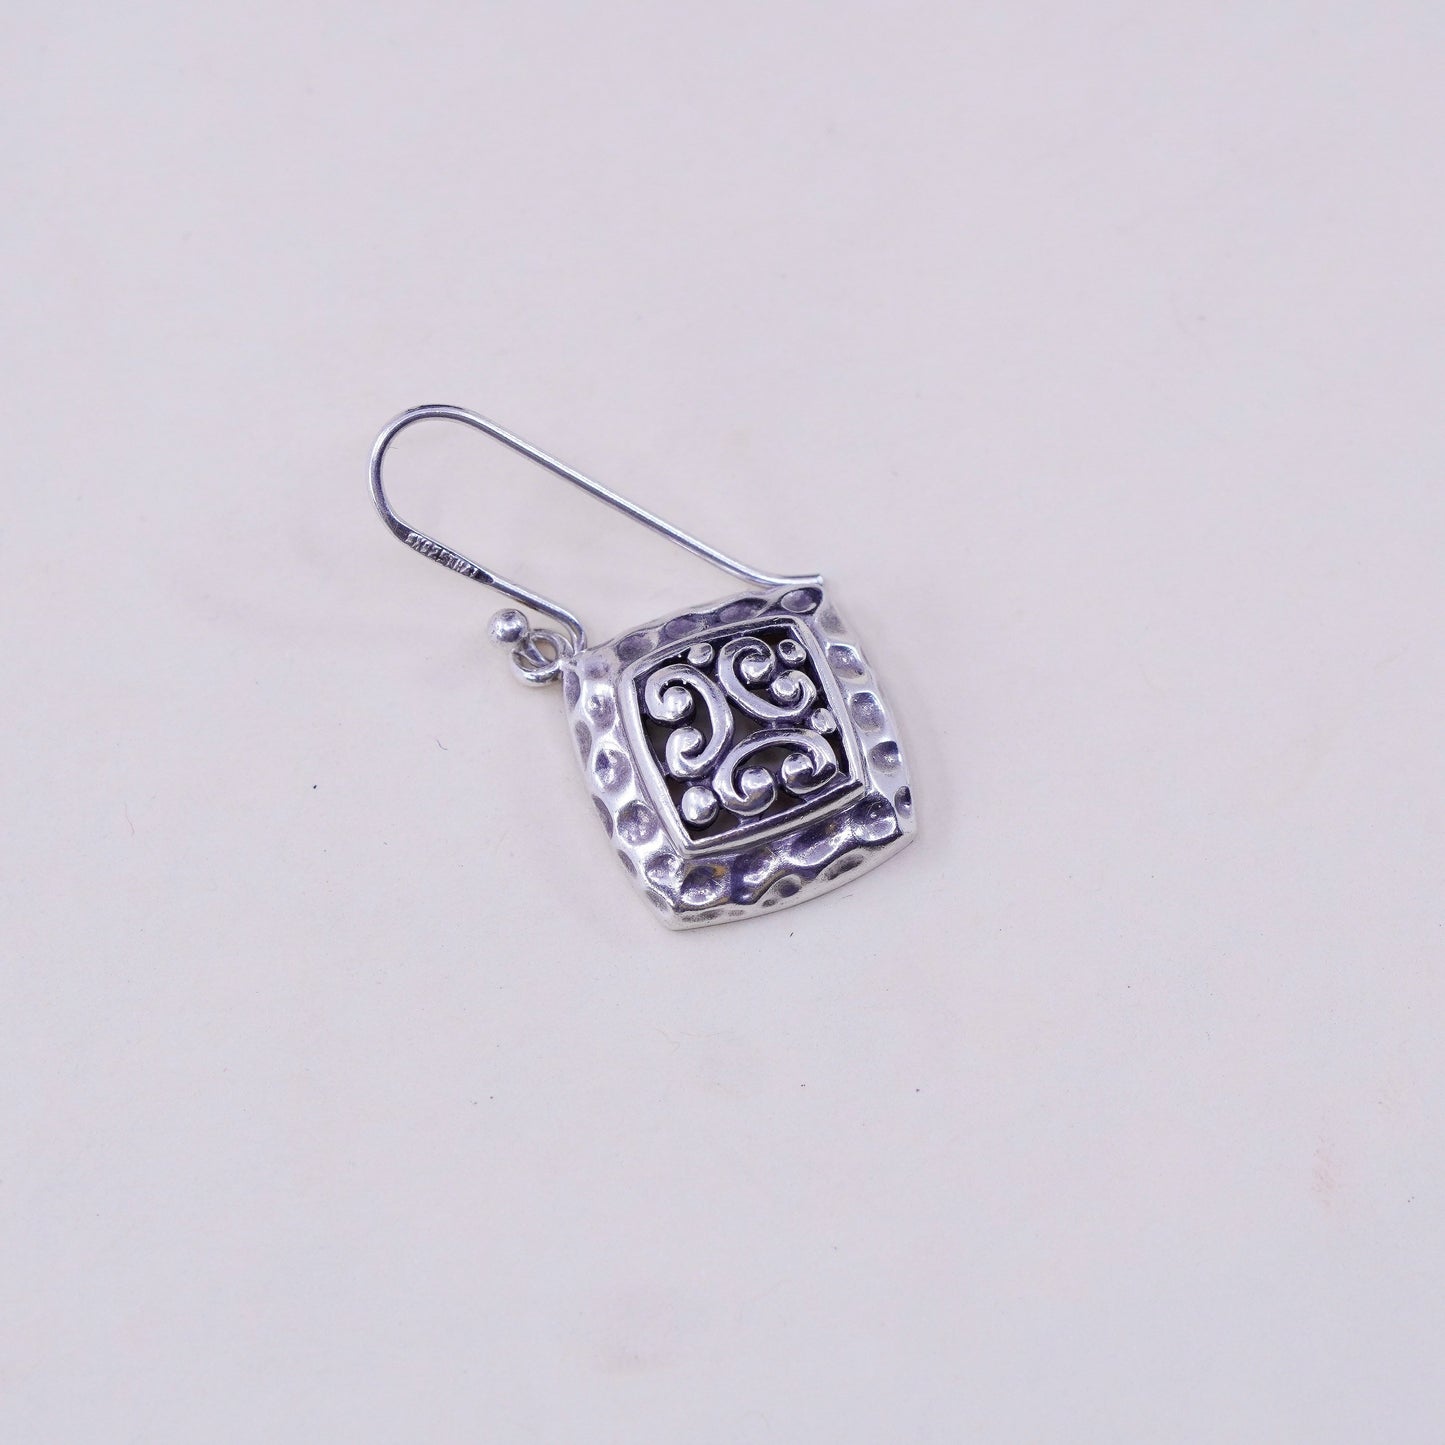 Vintage bali Sterling silver handmade earrings, 925 square with filigree